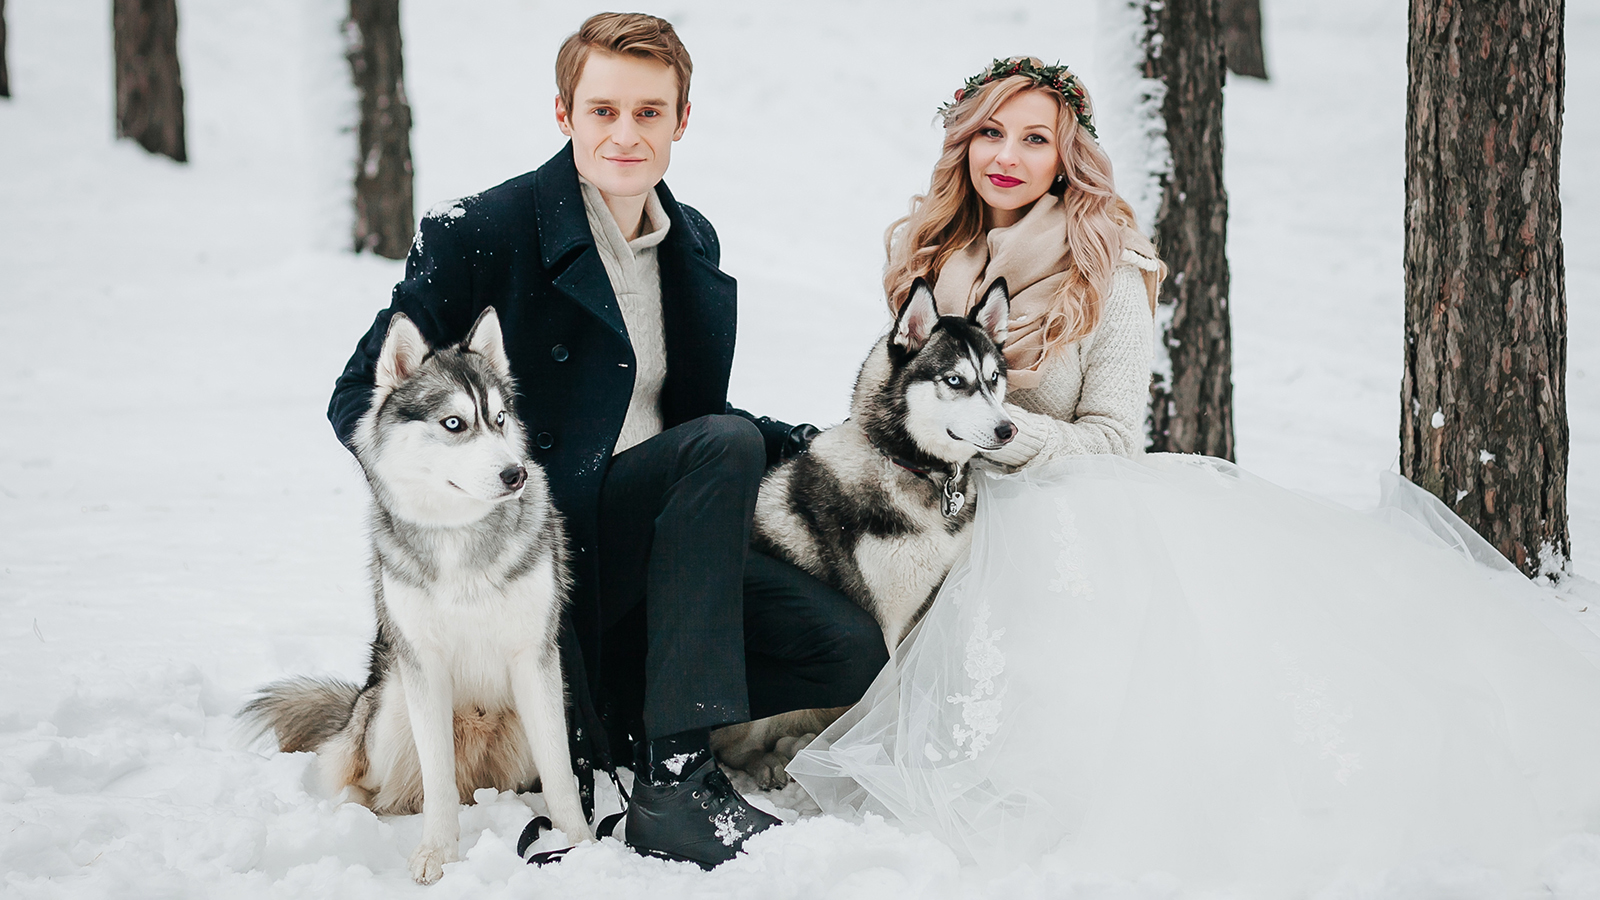 Cheerful couple are playing with siberian husky in snowy forest. Winter wedding